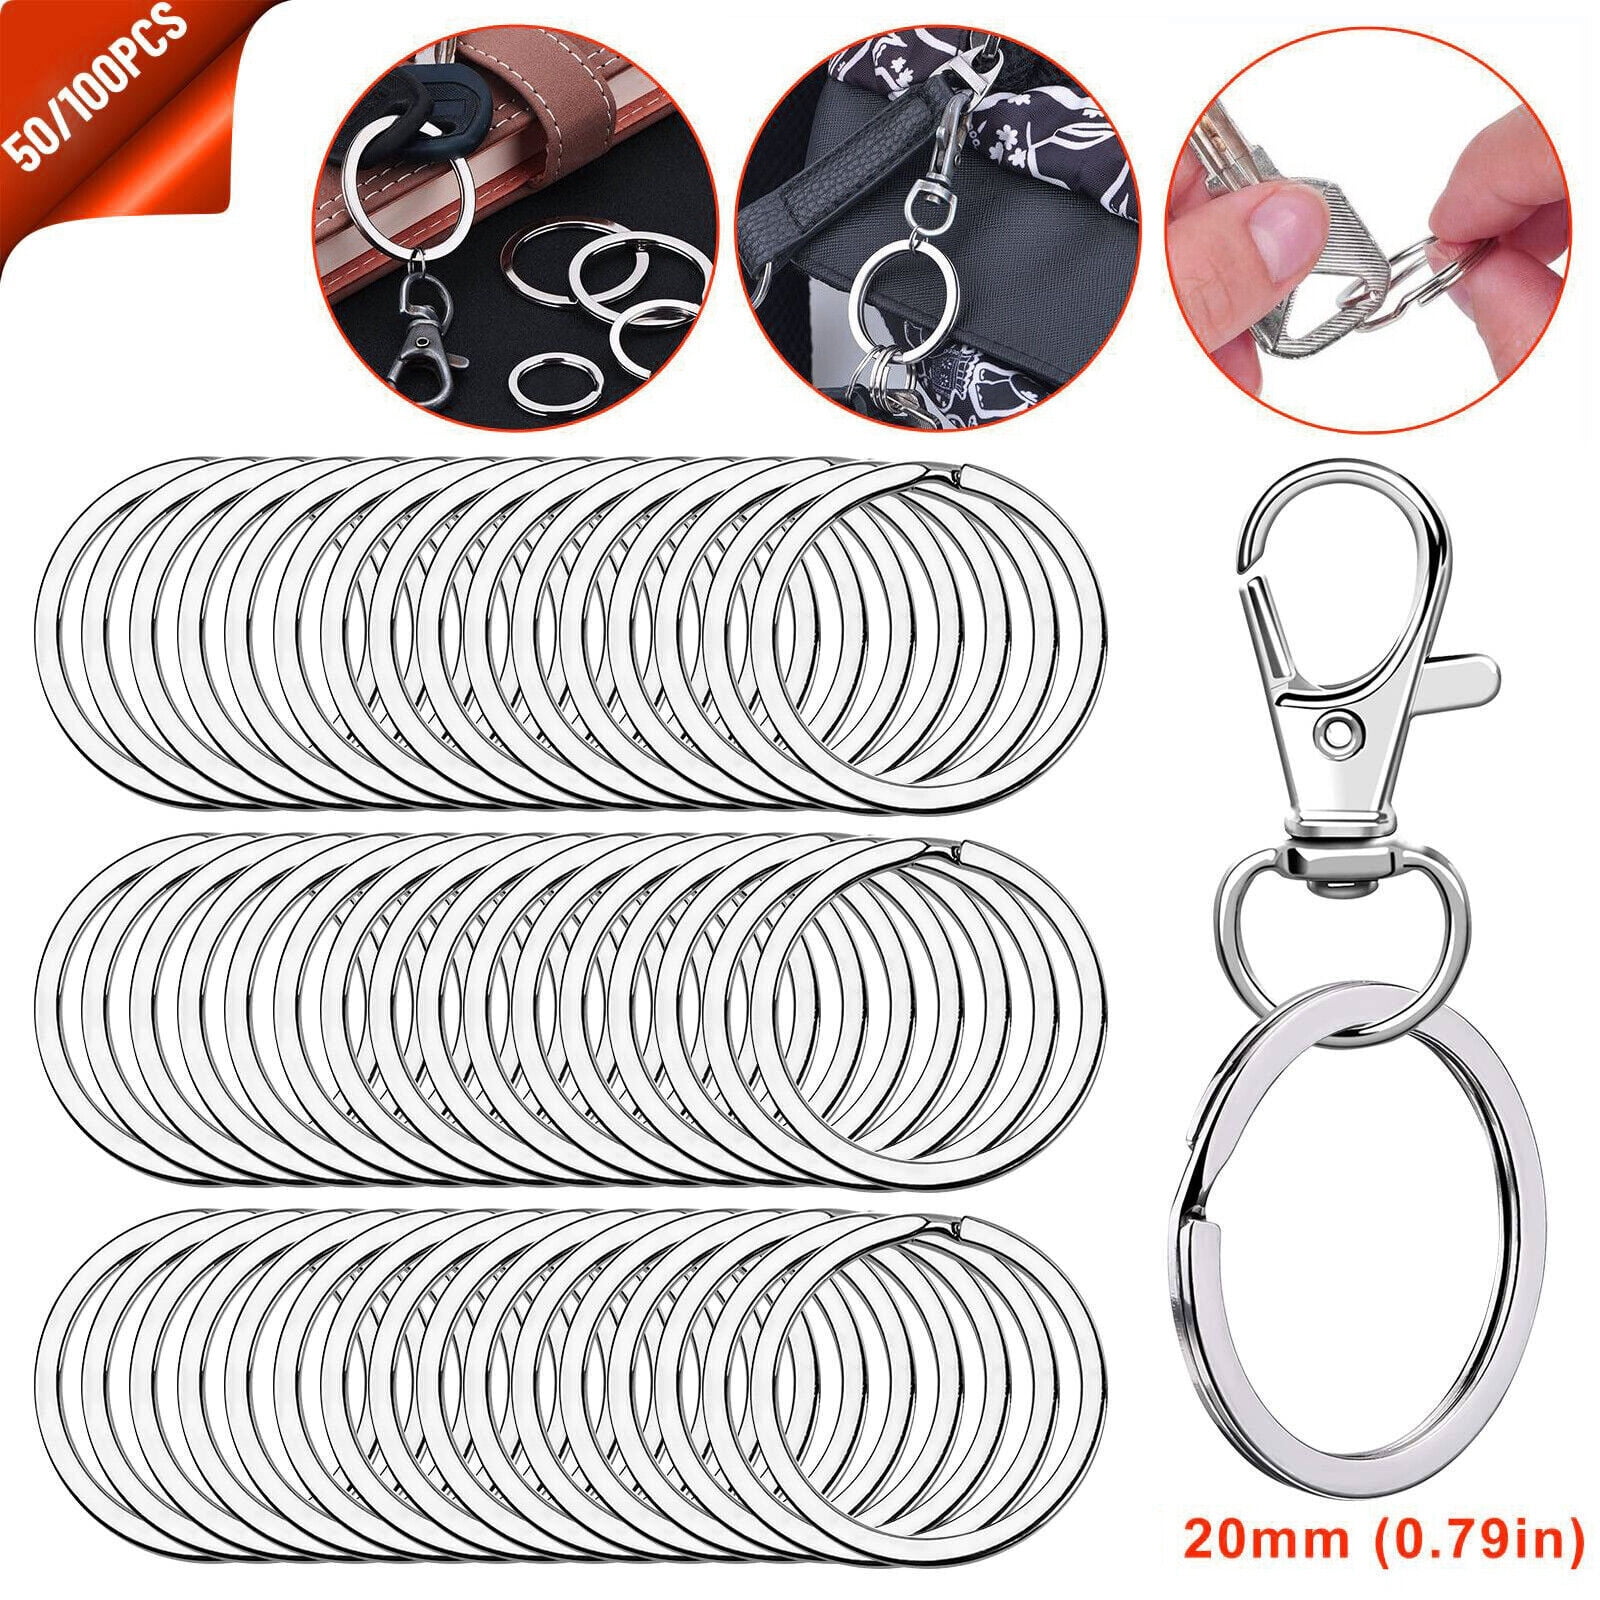 31 PCS Ring Sizer Adjuster for Loose Rings, Ring Snuggies, Mandrel for  Making Jewelry Guard, Spacer, Sizer, Fitter, Spiral Silicone Tightener Set,  Ring Resizer, Invisible Ring Sizer Ring Size Adjuster 